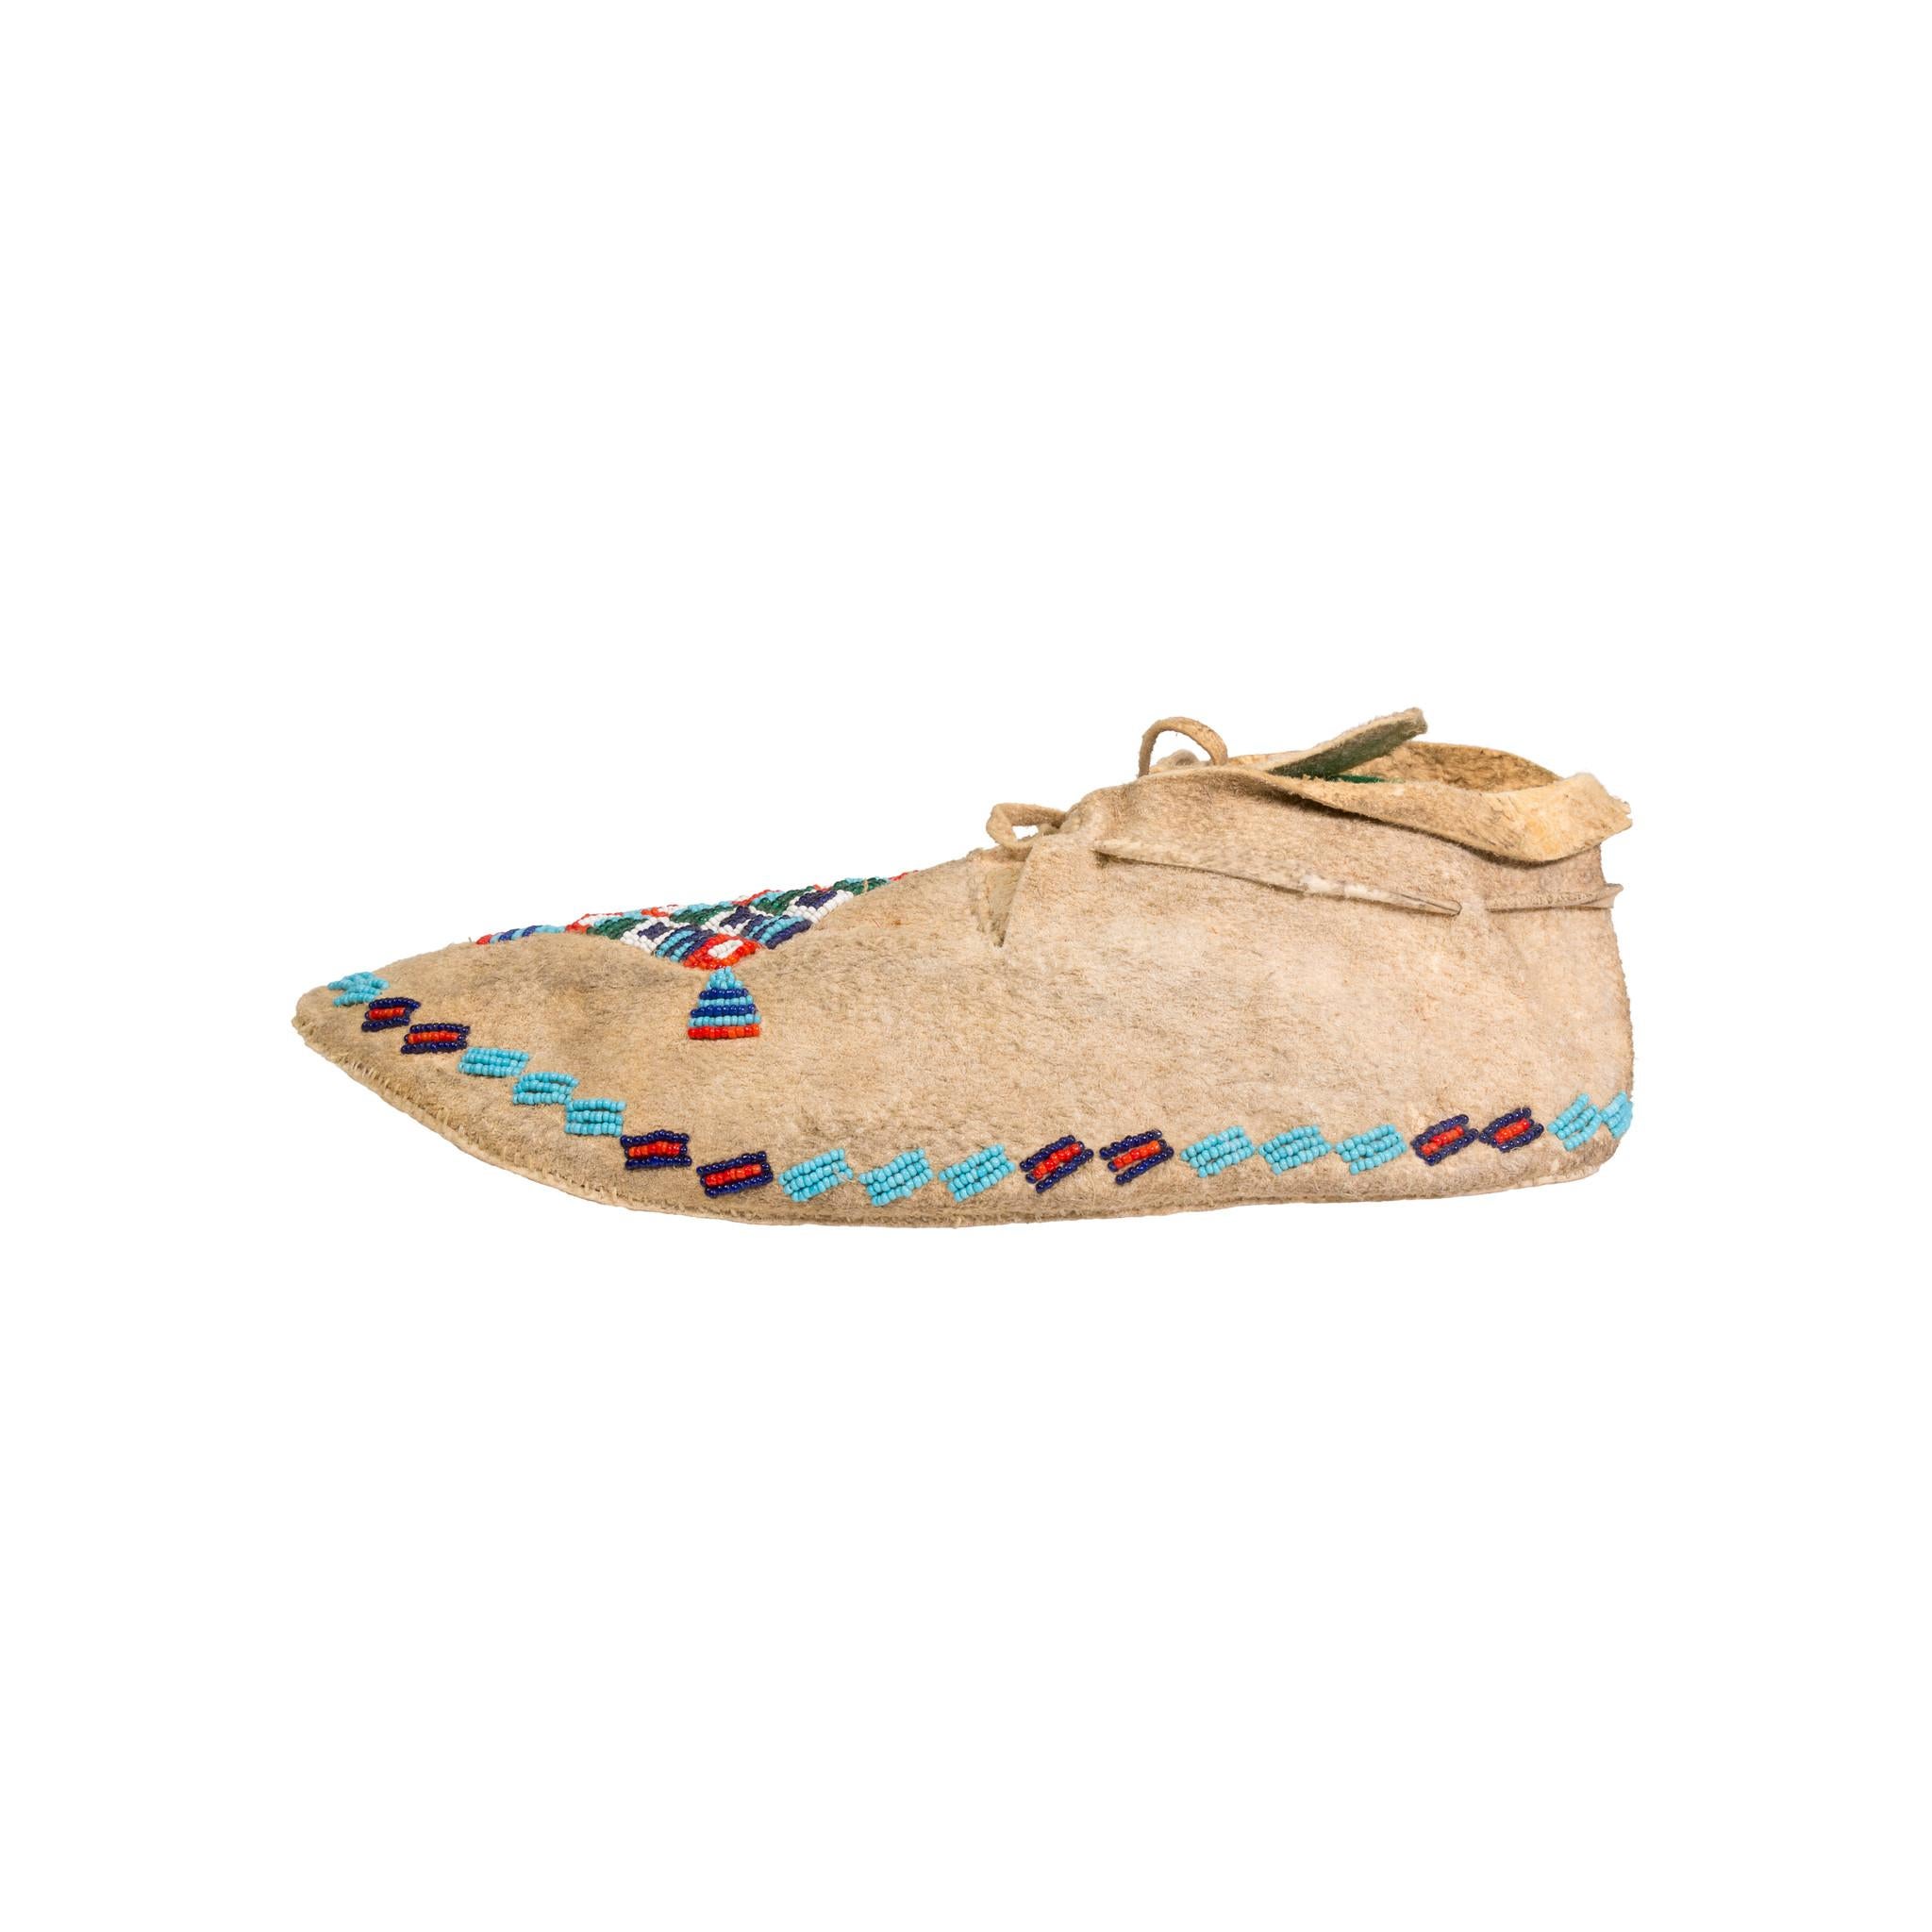 Arapaho beaded men’s moccasins of brain tanned deer skin with parfleche soles. Trunk piece, unused condition. Great display piece.

Period: First quarter of the 20th century
Origin: Arapaho
Size: 10